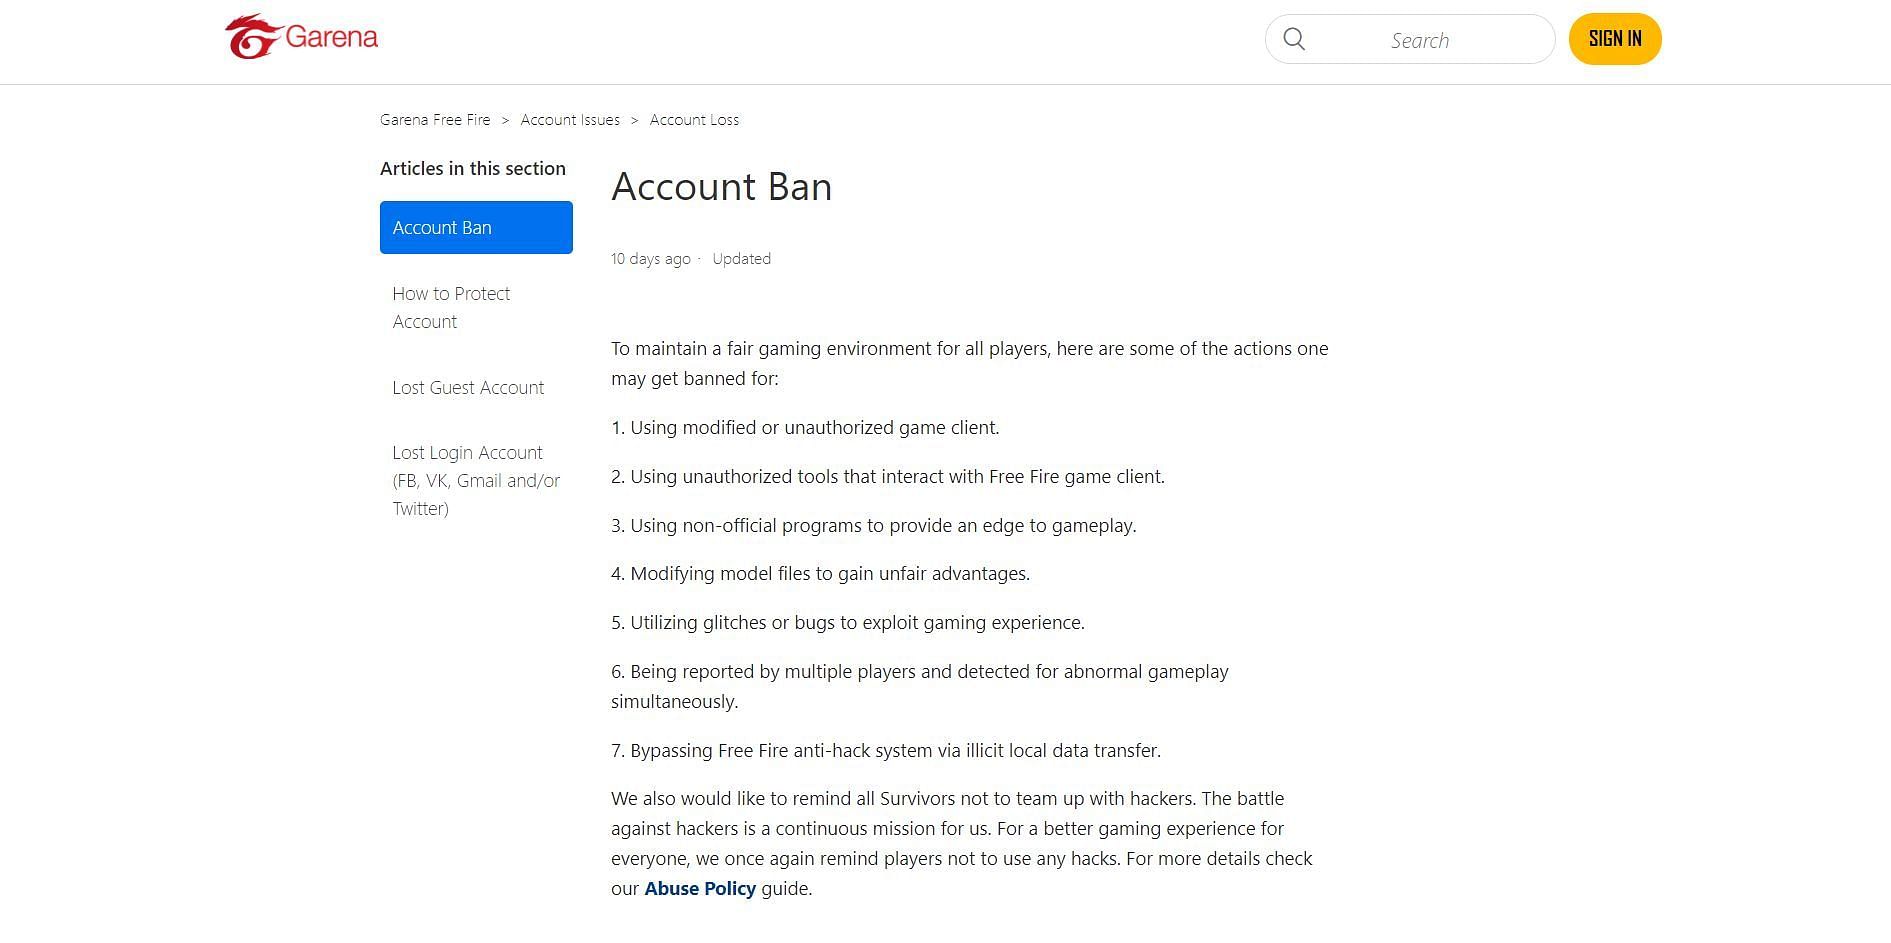 Reasons for getting banned in the game (Image via ffsupport.garena)